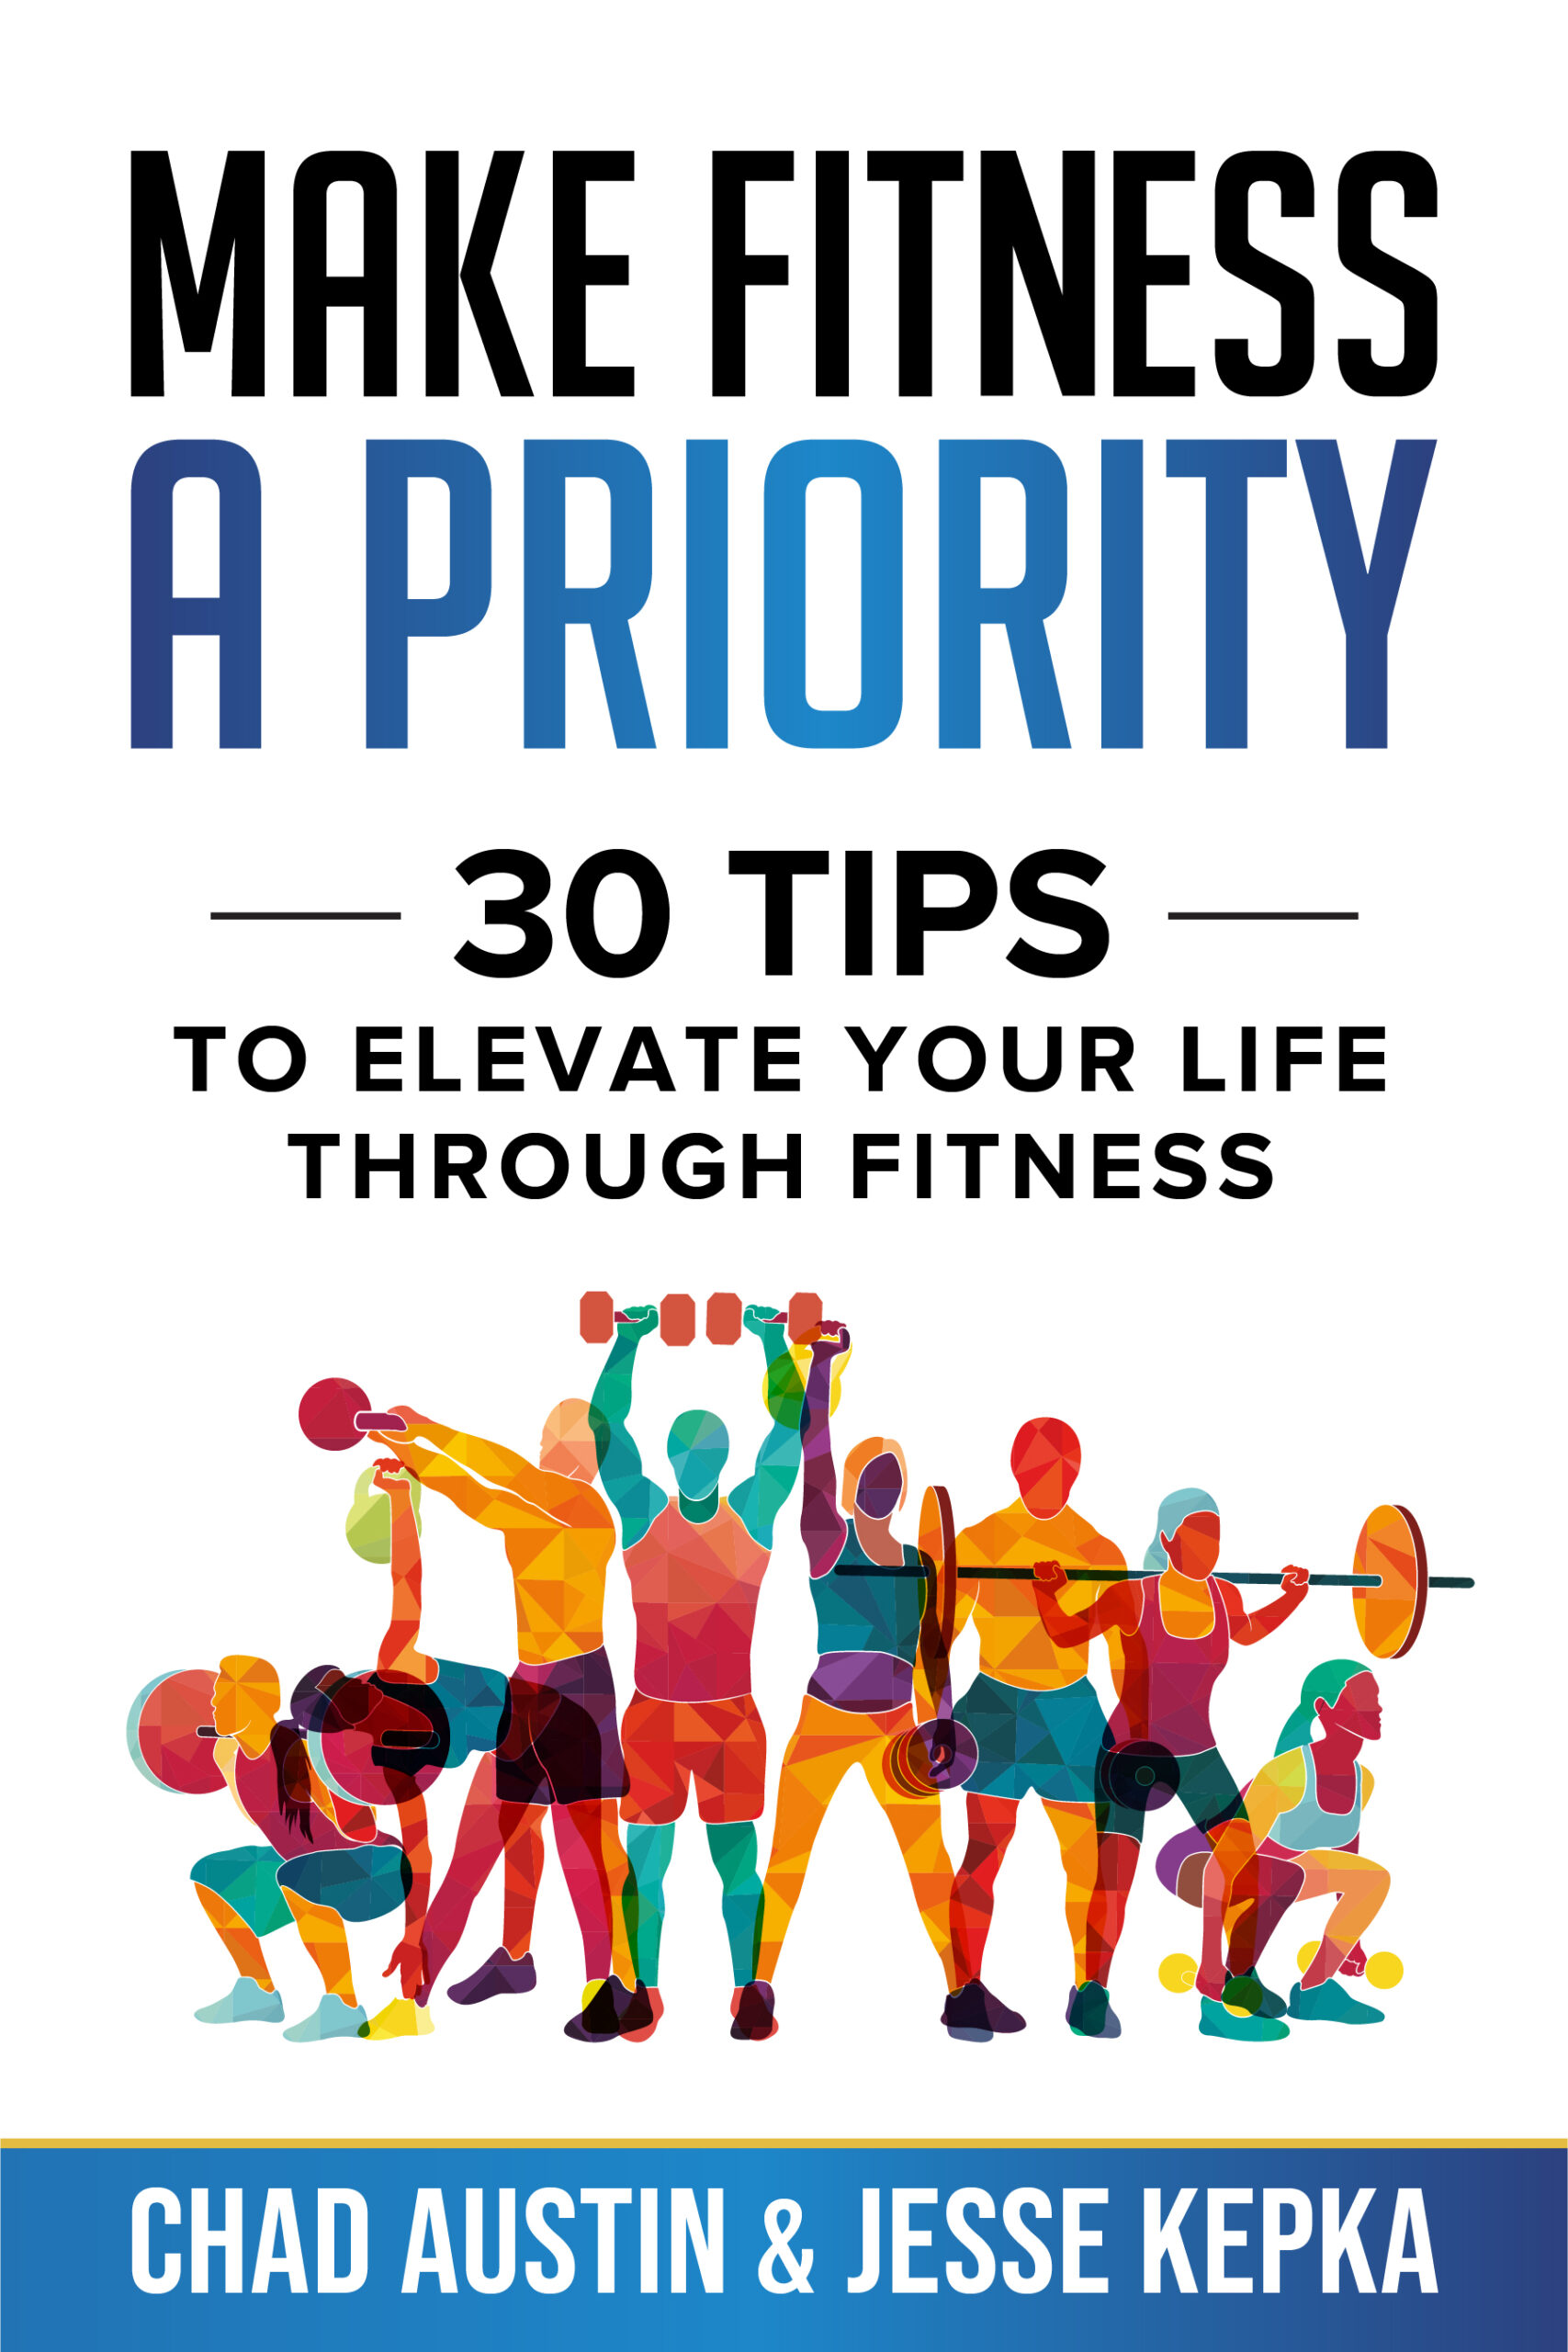 FREE: Make Fitness A Priority: 30 tips to elevate your life through fitness by Chad Austin